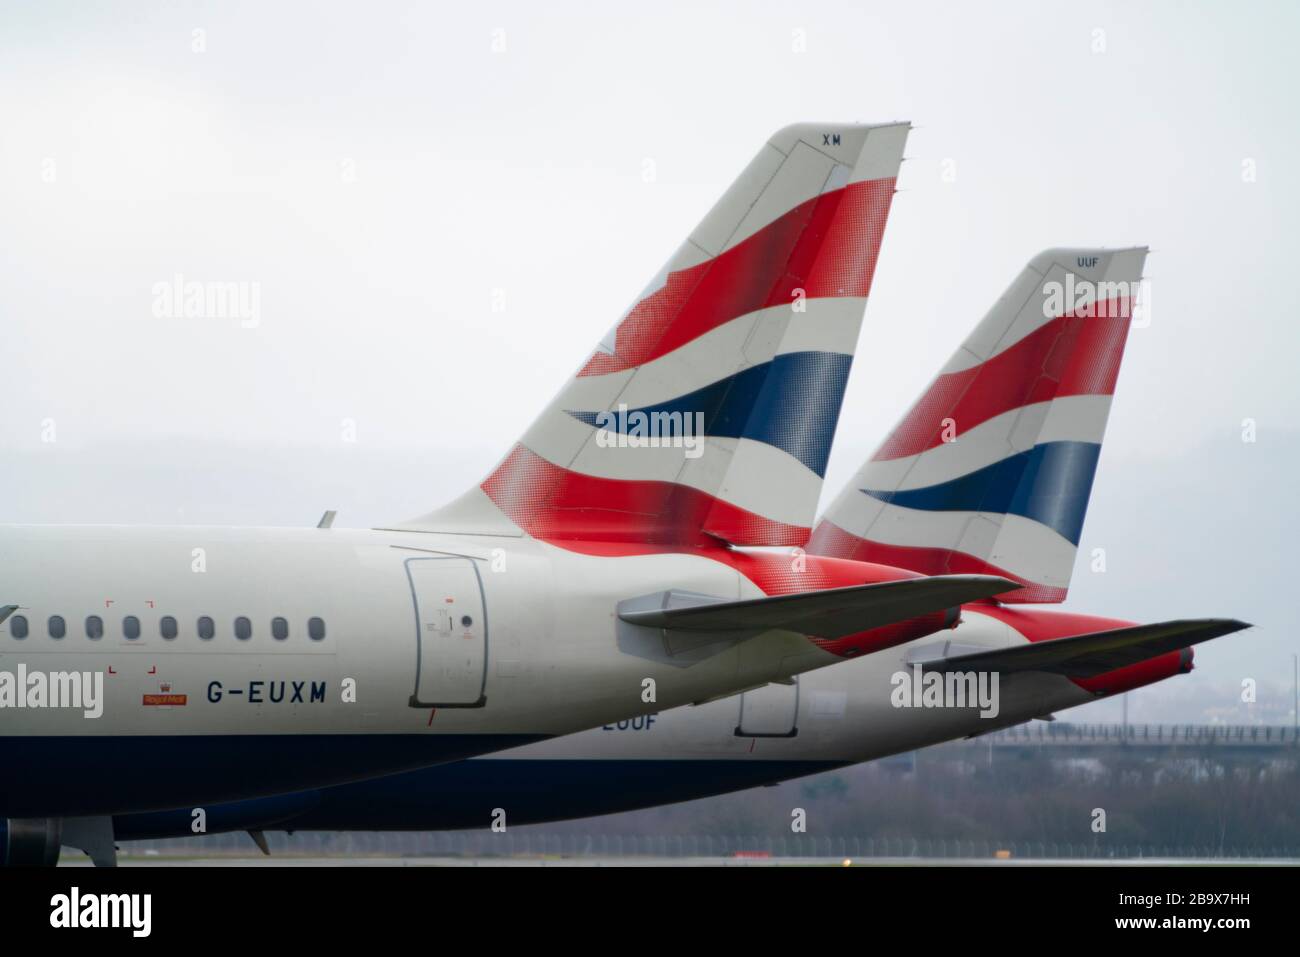 Glasgow, Scotland, UK. 25 March, 2020. Day two of the Government enforced lockdown in the UK. All shops and restaurants and most workplaces remain closed. Cities are very quiet with vast majority of population staying indoors. Pictured; British Airways passenger aircraft remain grounded and parked at Glasgow Airport. Iain Masterton/Alamy Live News Stock Photo